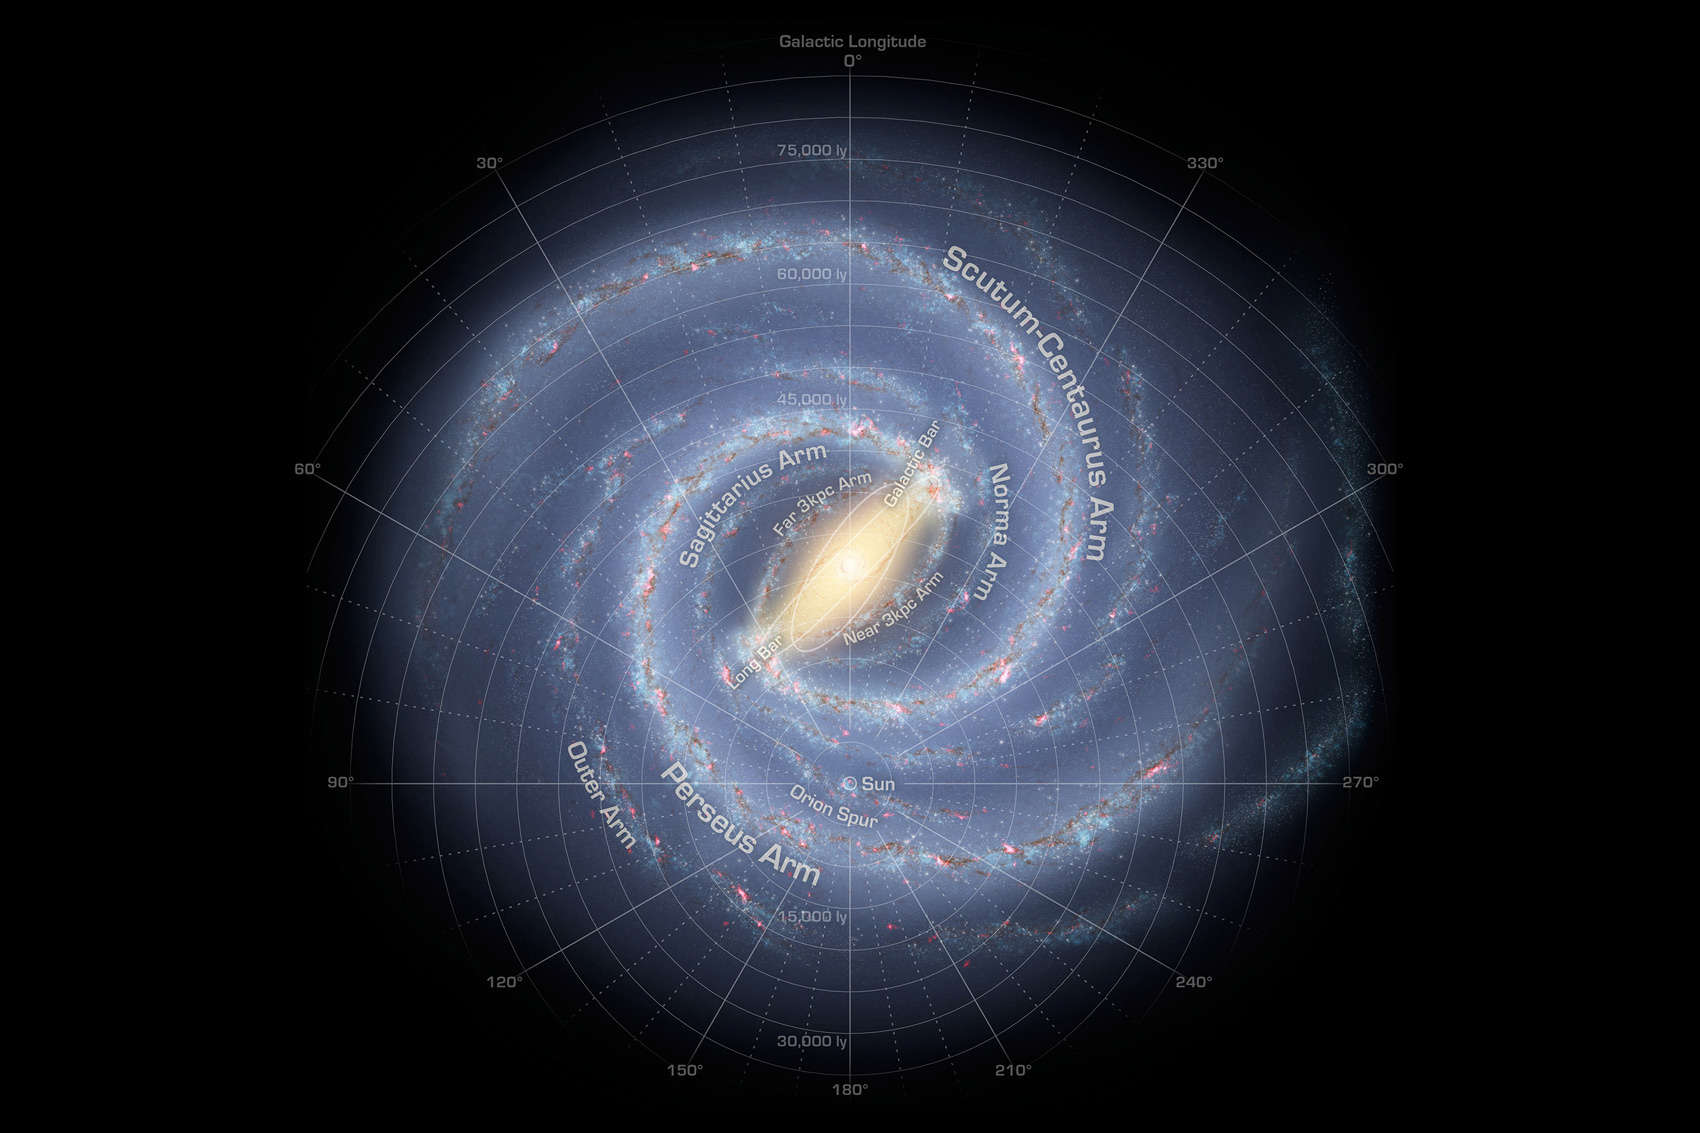 A modern map of the Milky Way Galaxy, showing the Sun below center. Despite being 120,000 light years across, even using relatively modest technology it could be explored in just a few hundred million years. Credit: NASA/JPL-Caltech/R. Hurt (SSC/Caltech)